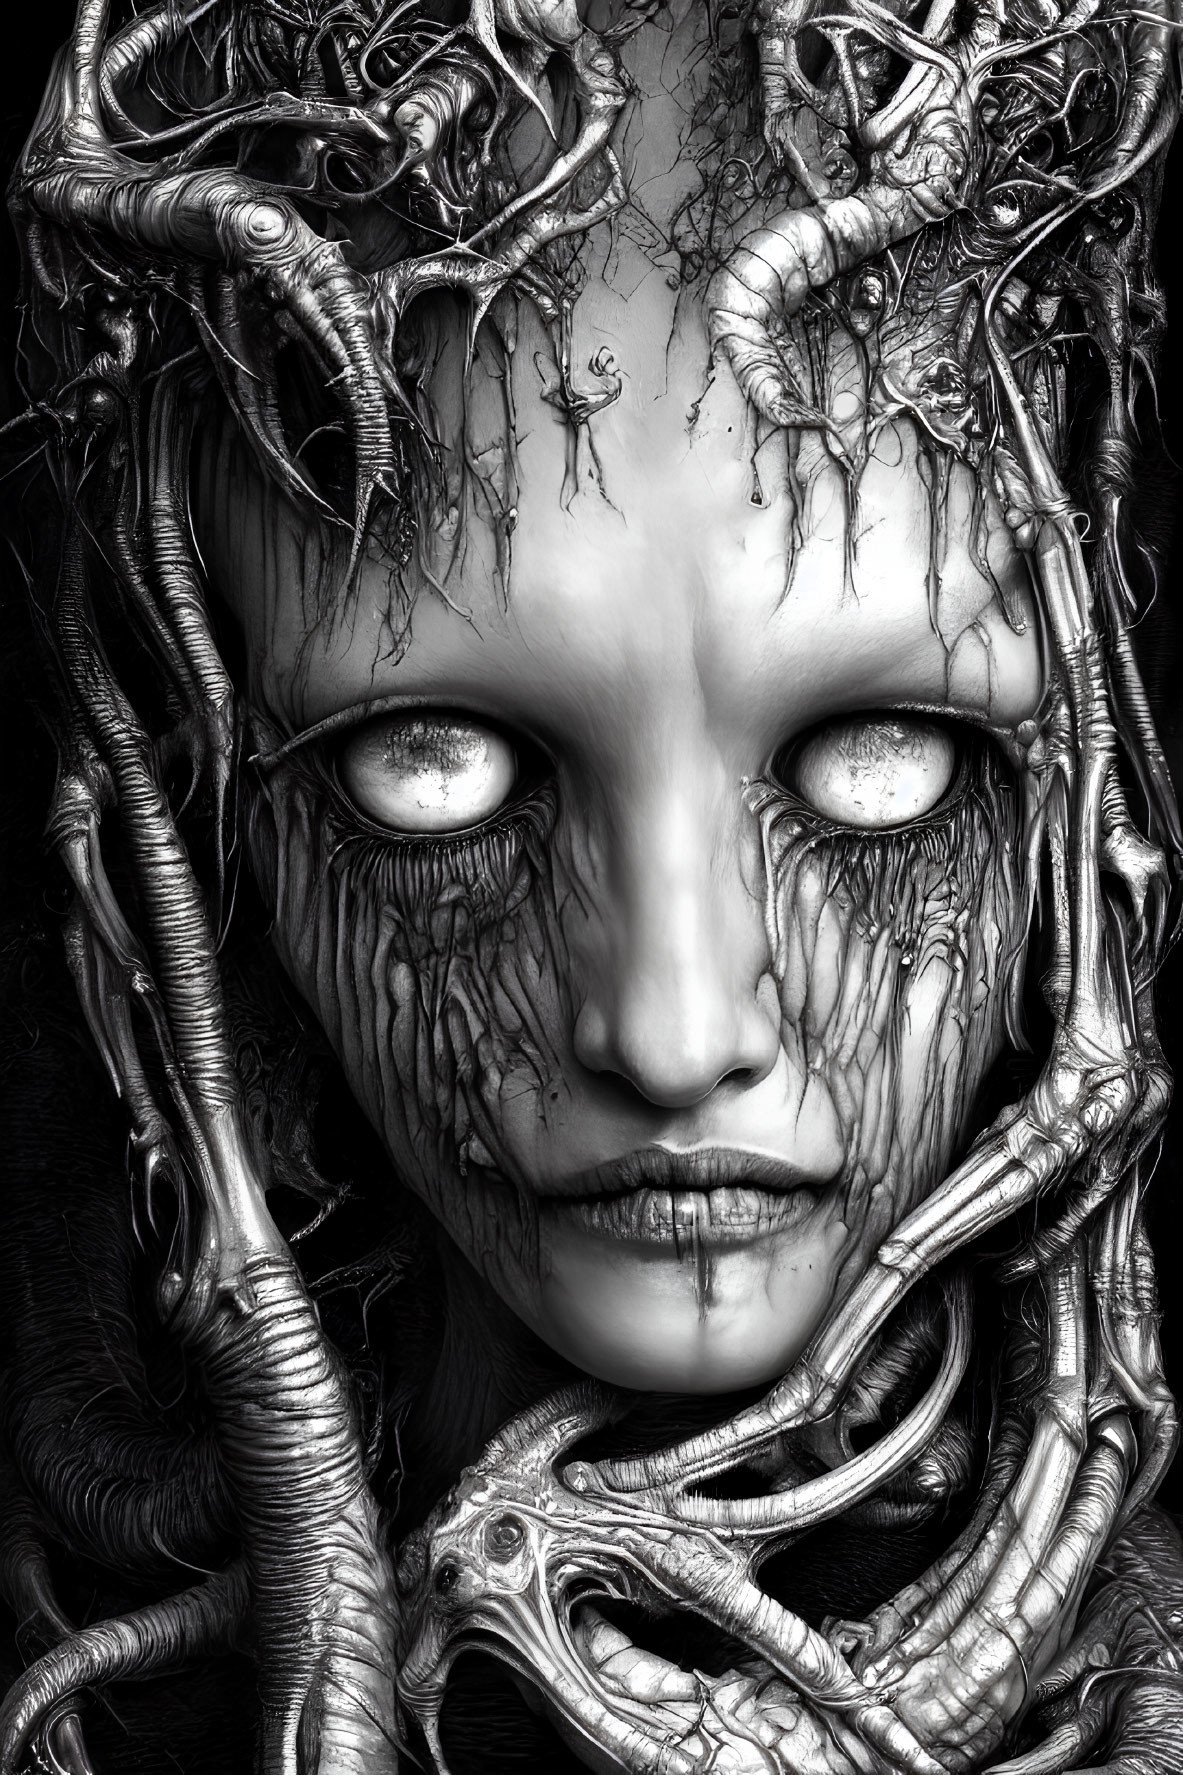 Monochrome art: Humanoid face entwined with tree-like structures